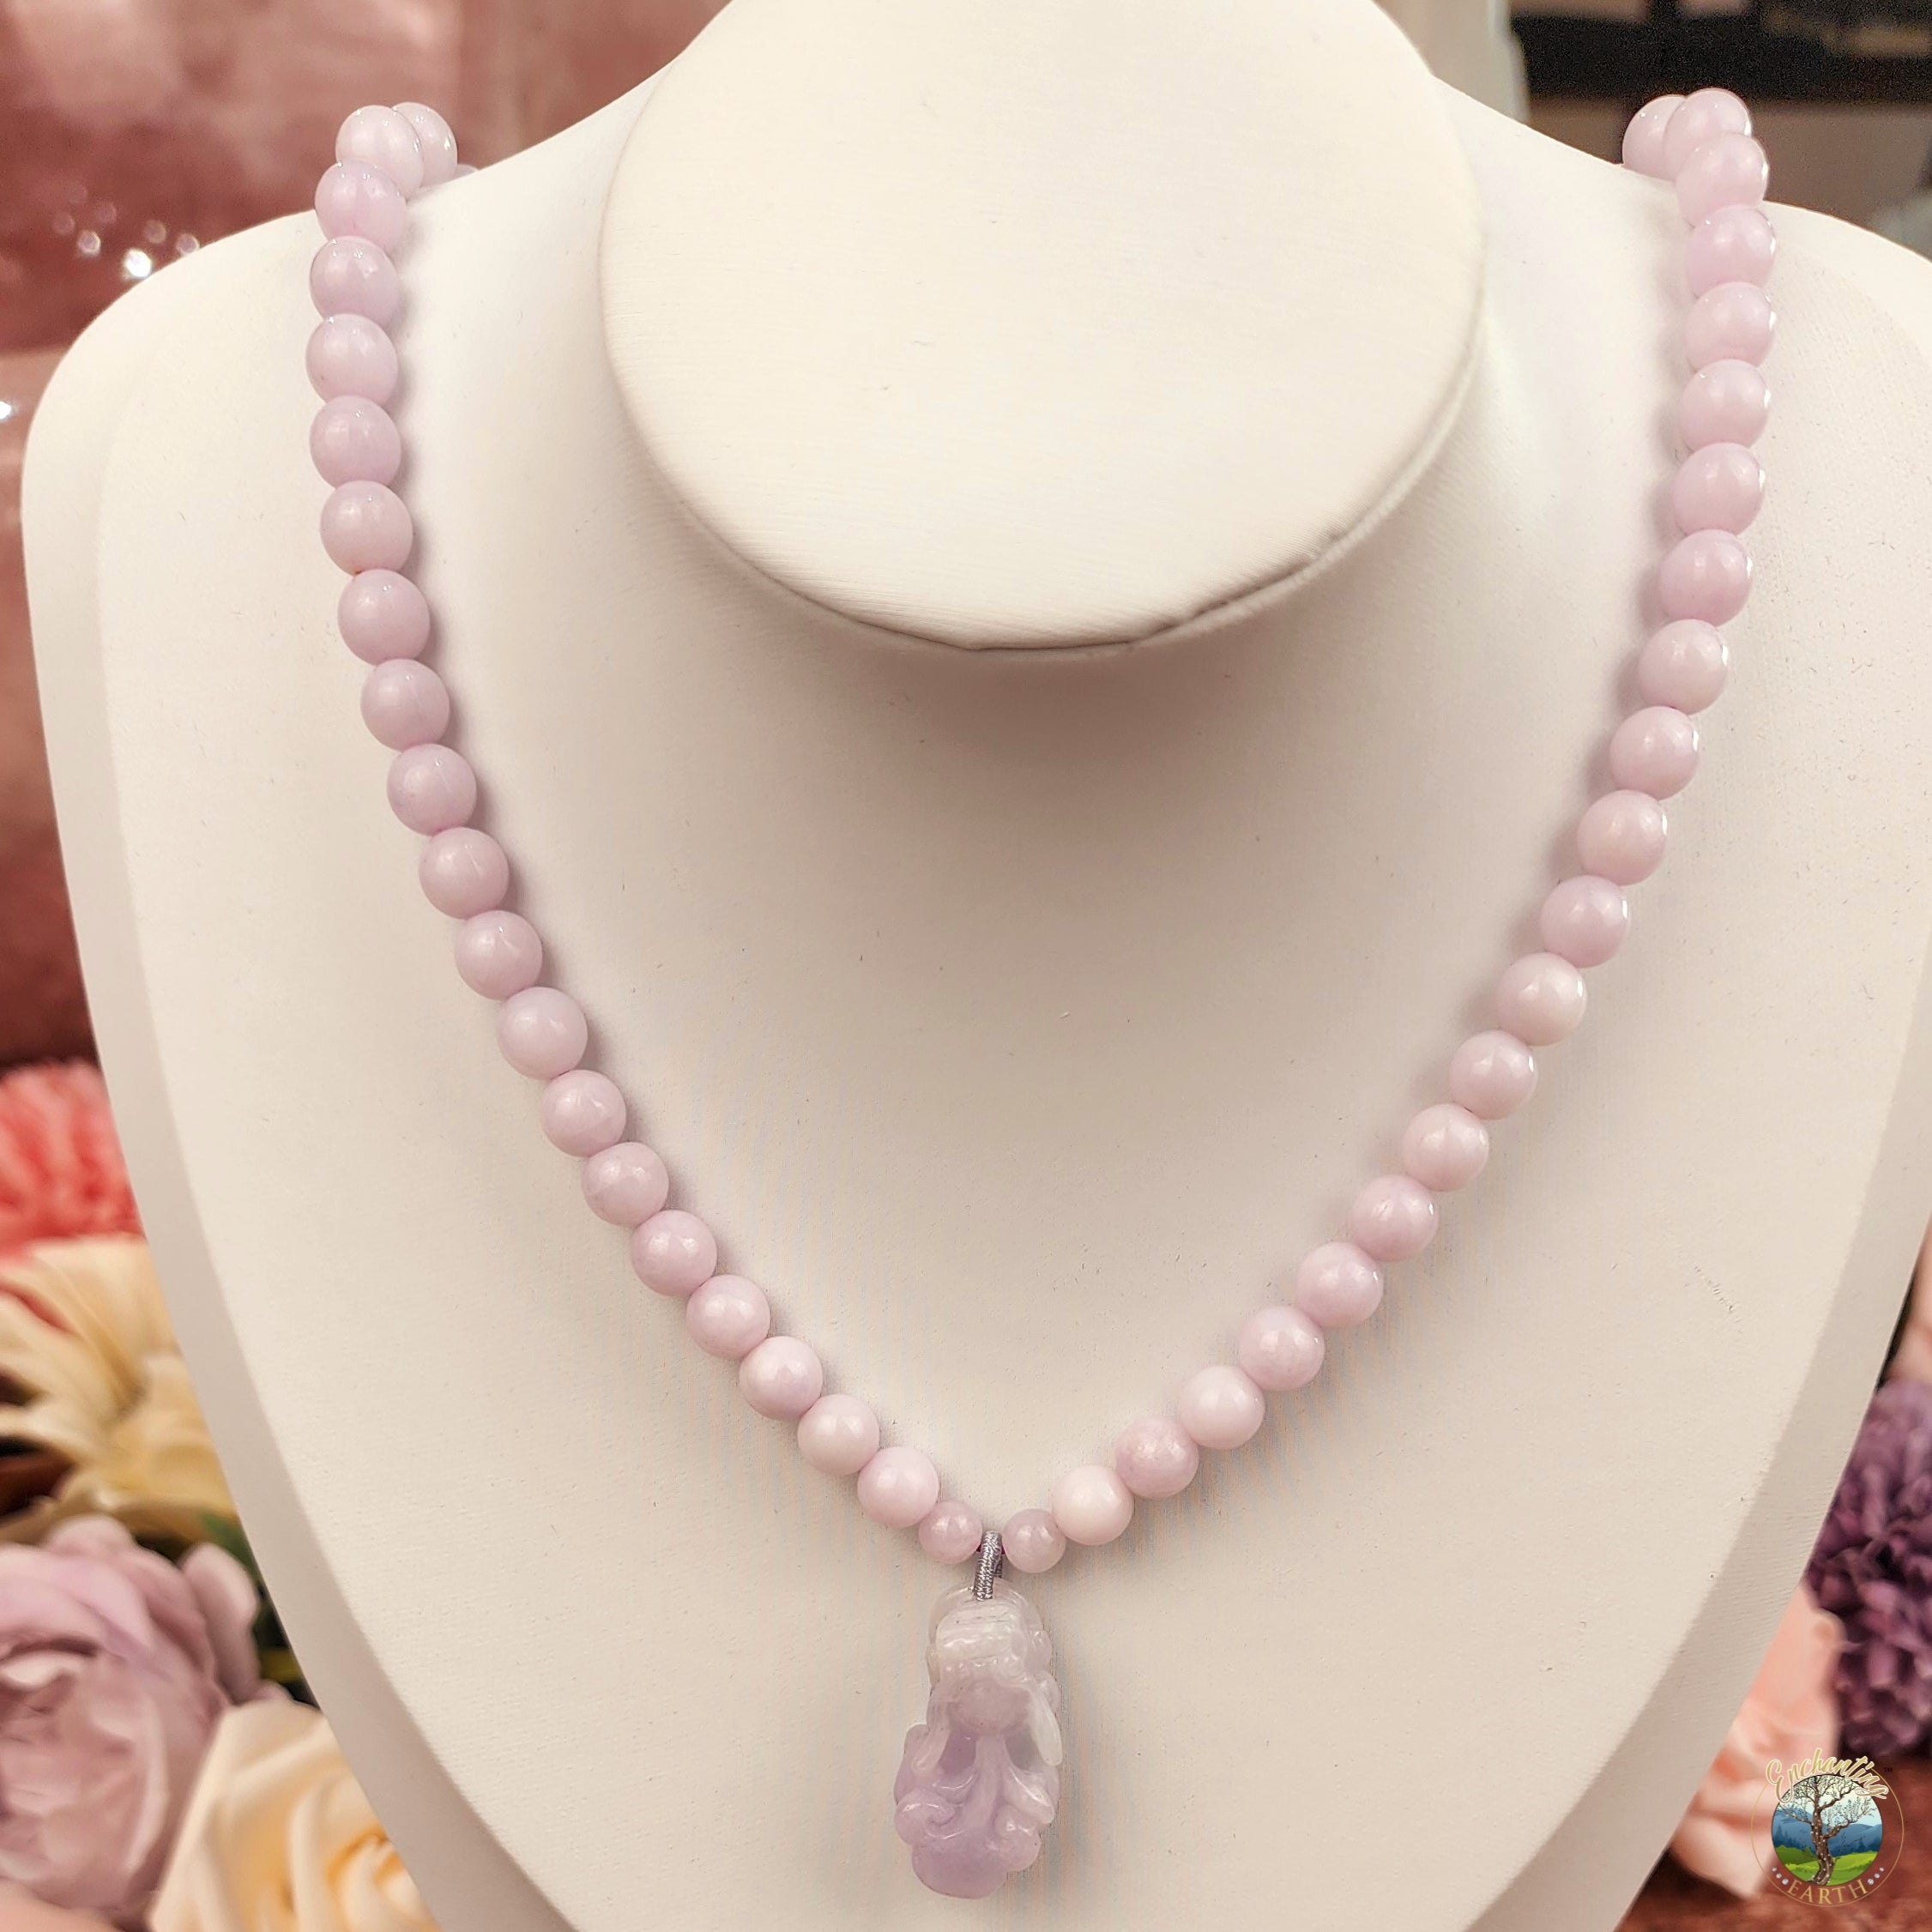 Lavender Jade Pixiu Necklace for Acceptance and Serenity